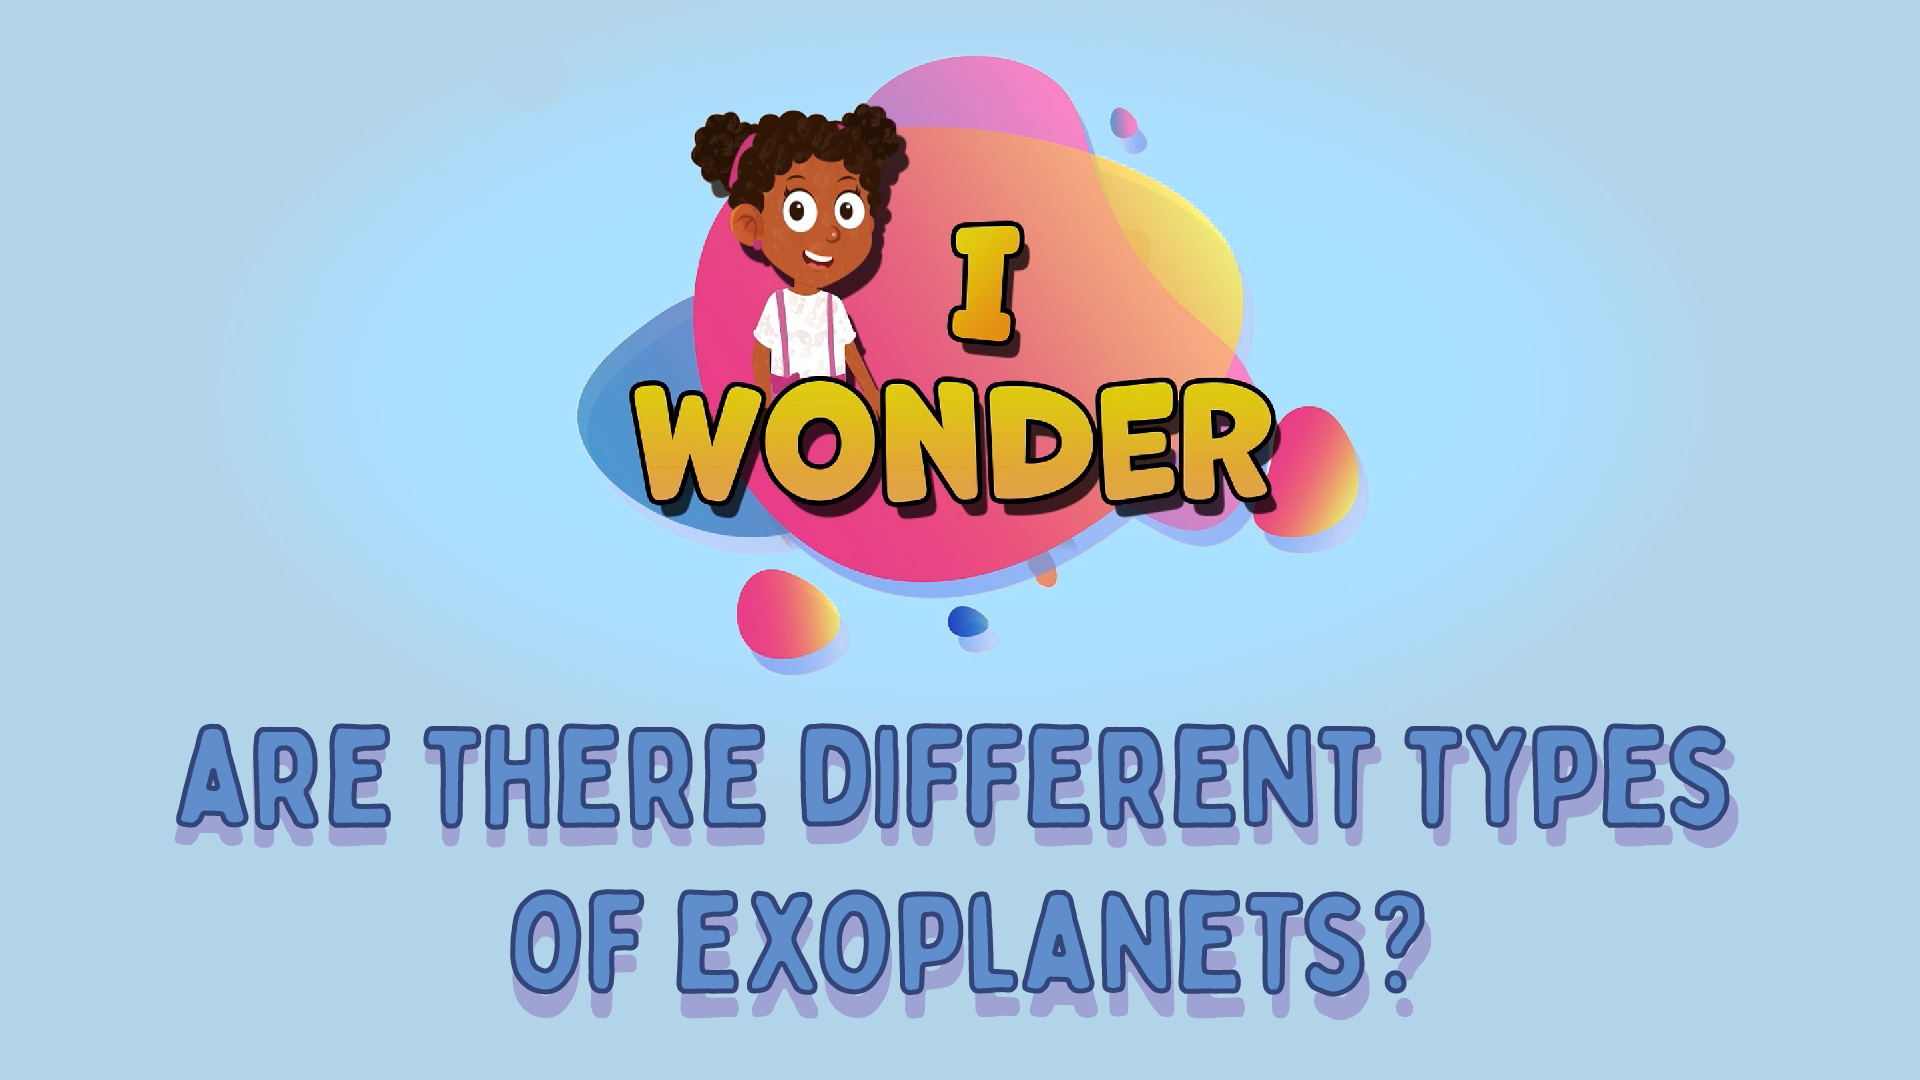 Are There Different Types Of Exoplanets?